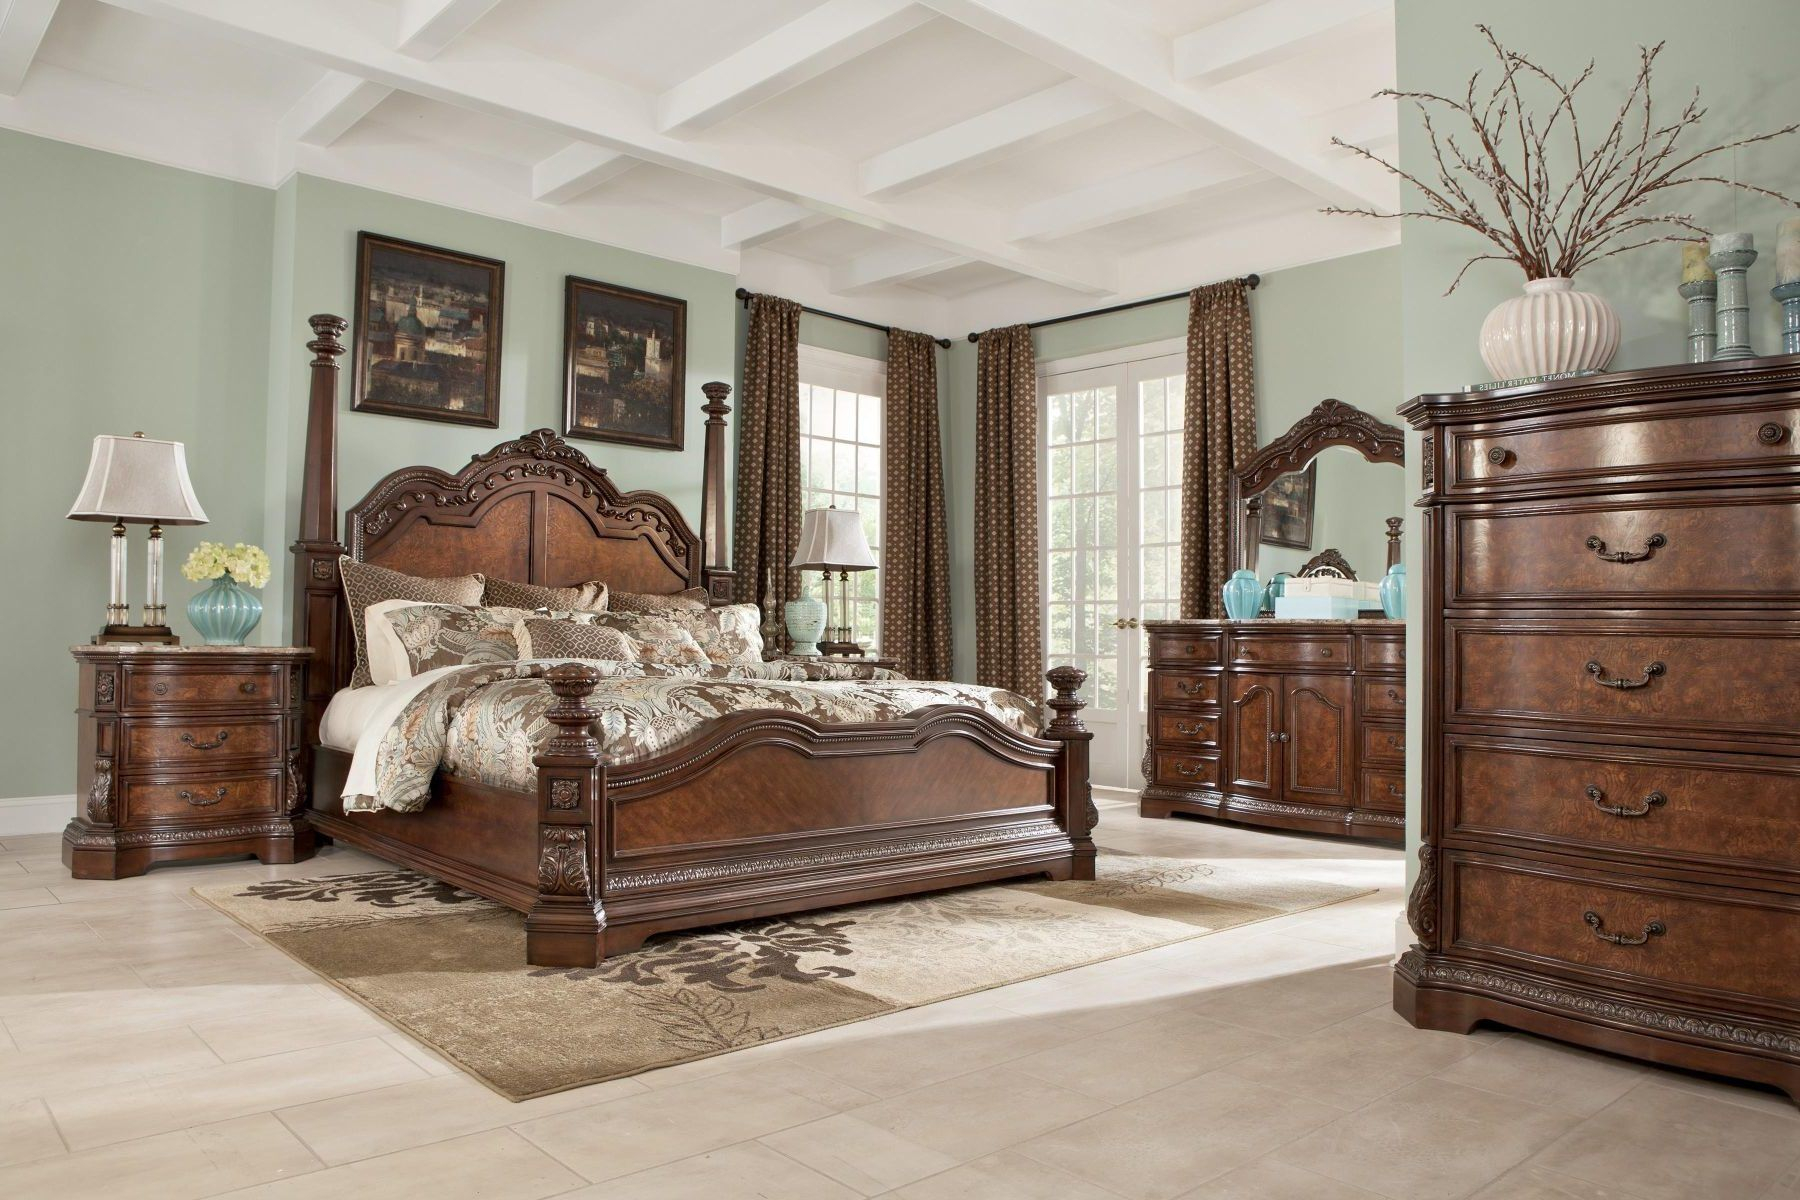 Cool Great Marlo Furniture Bedroom Sets 24 On Home Design Ideas With inside size 1800 X 1200